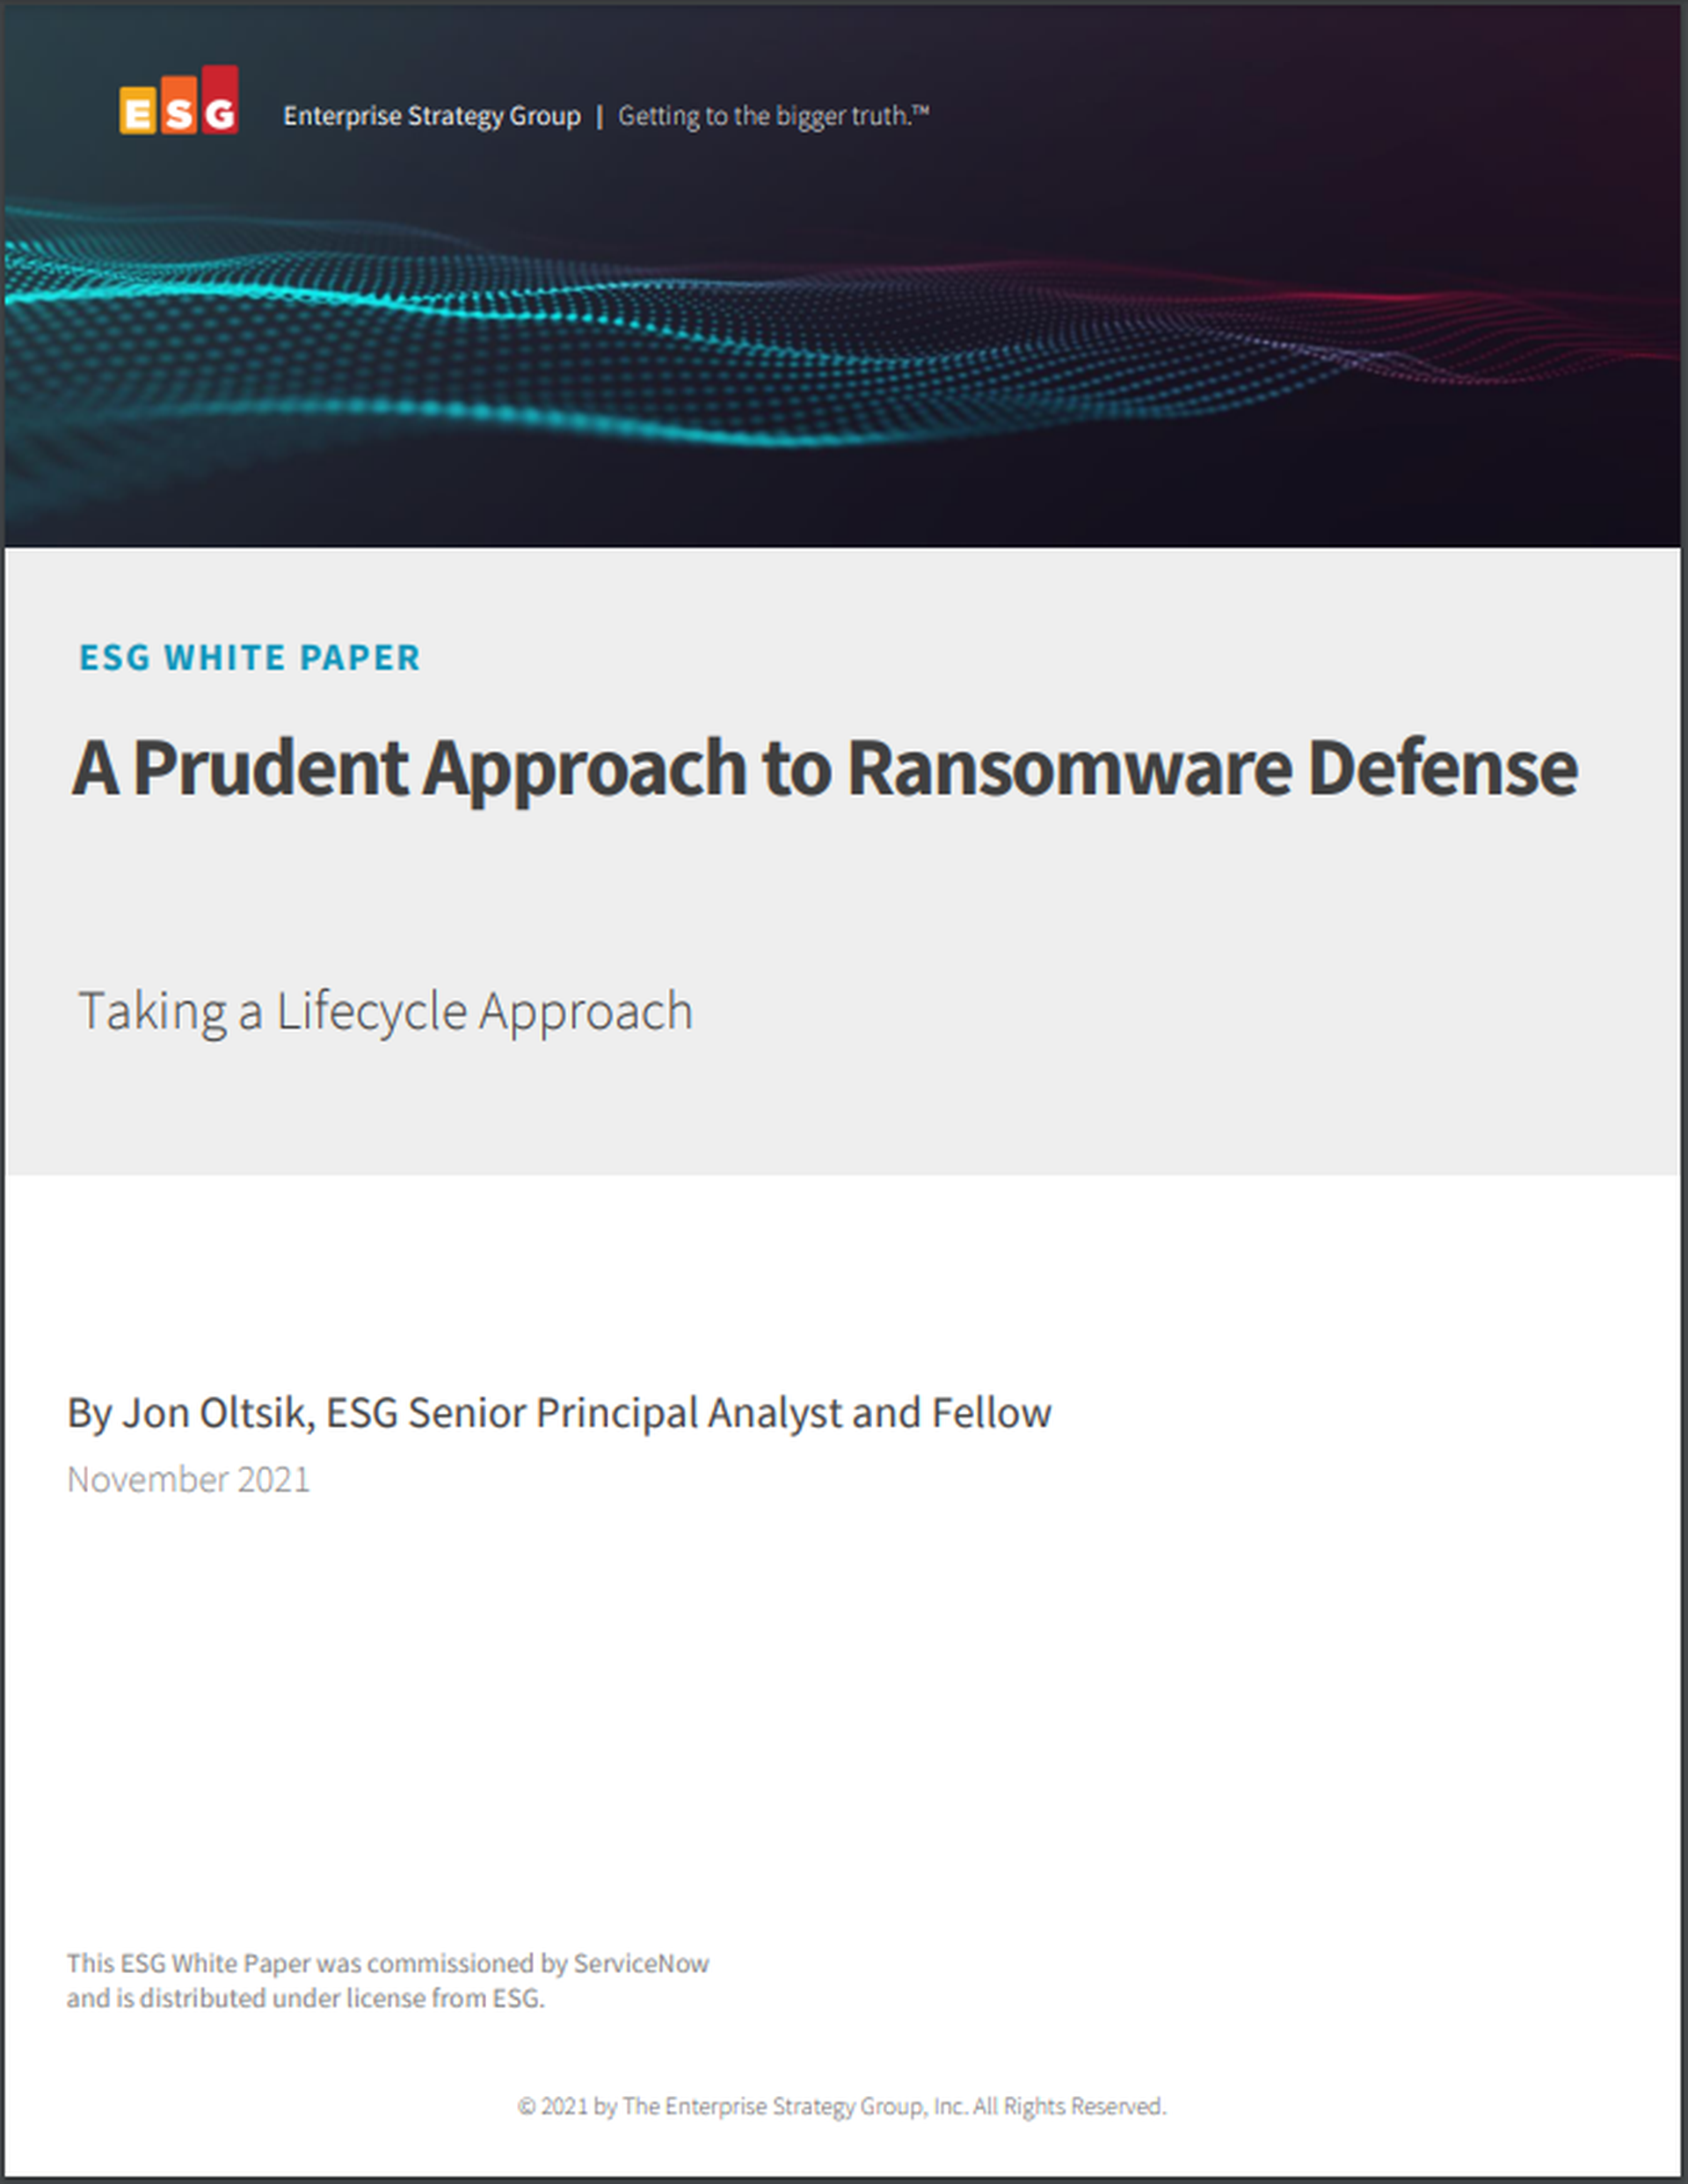 Enterprise Strategy Group: A Prudent Approach to Ransomware Defense